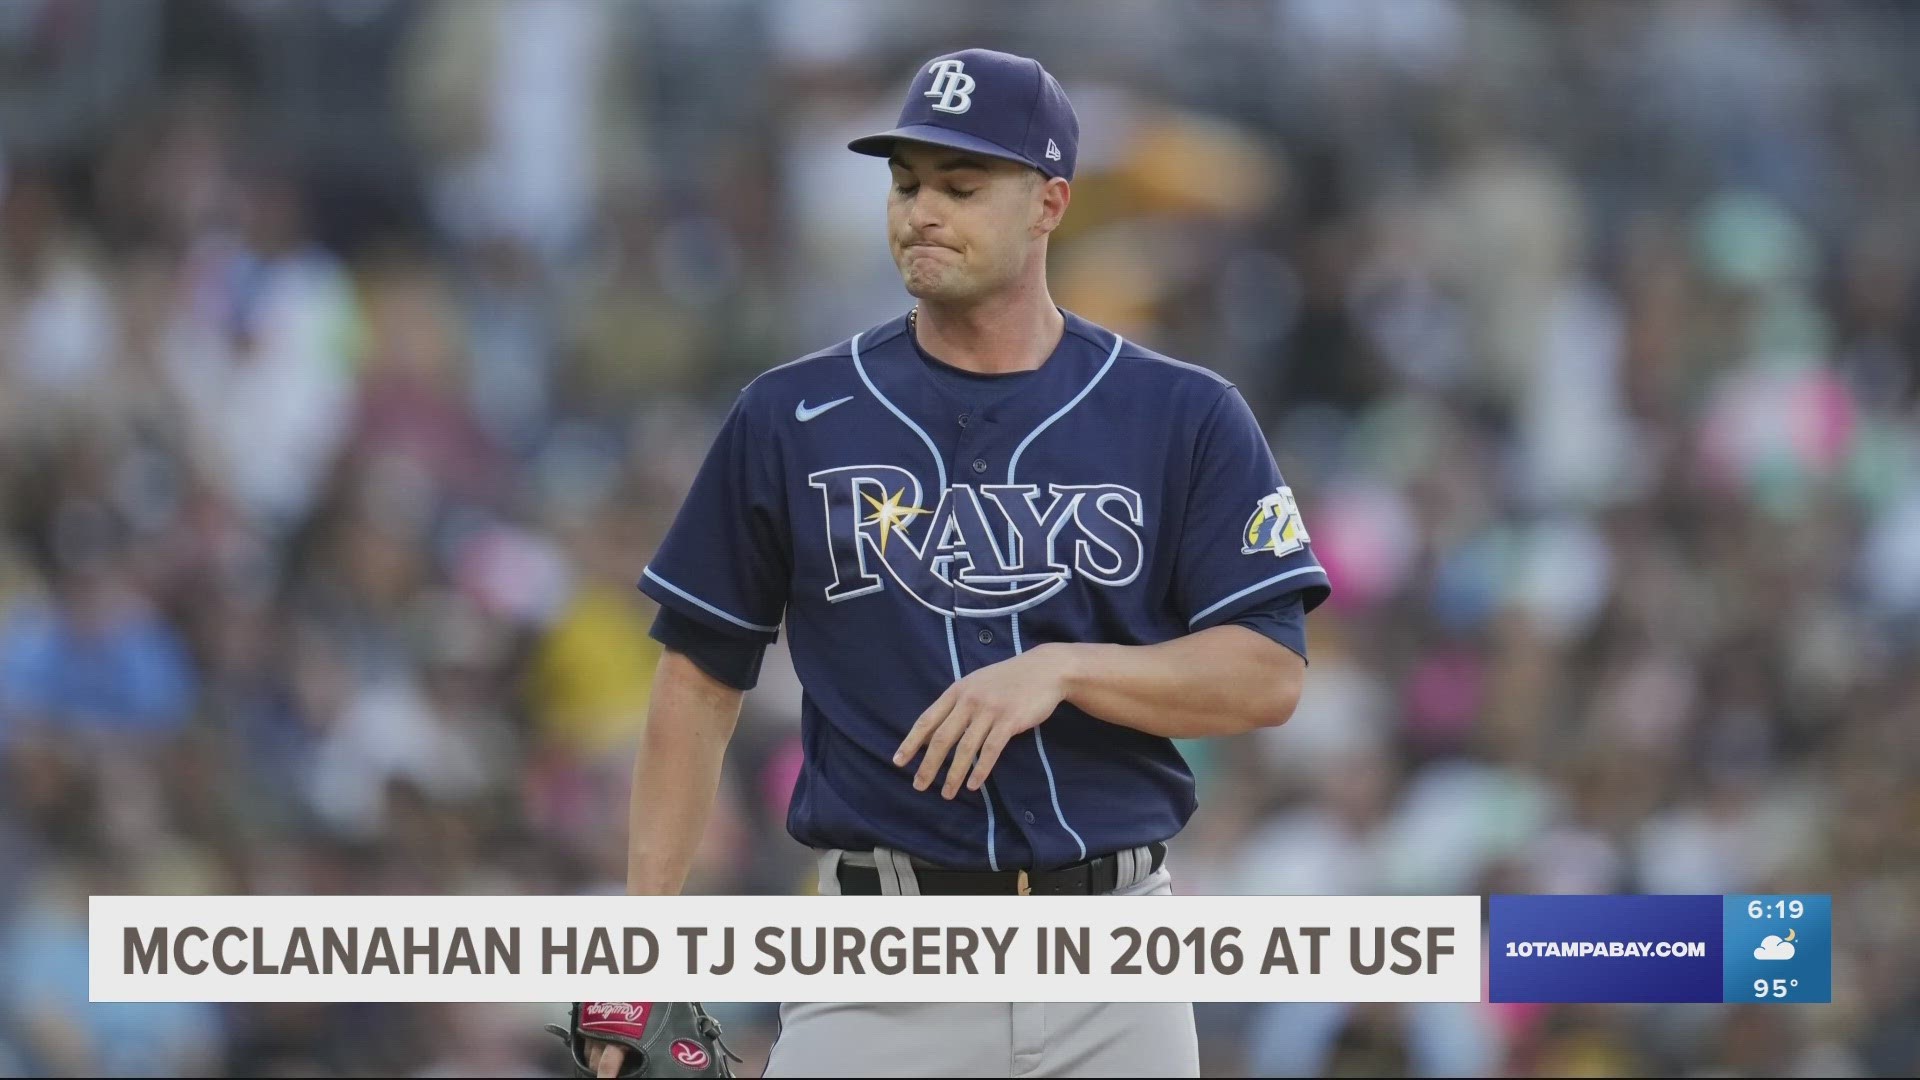 Shane McClanahan prepares for All-Star Game, makes history for USF